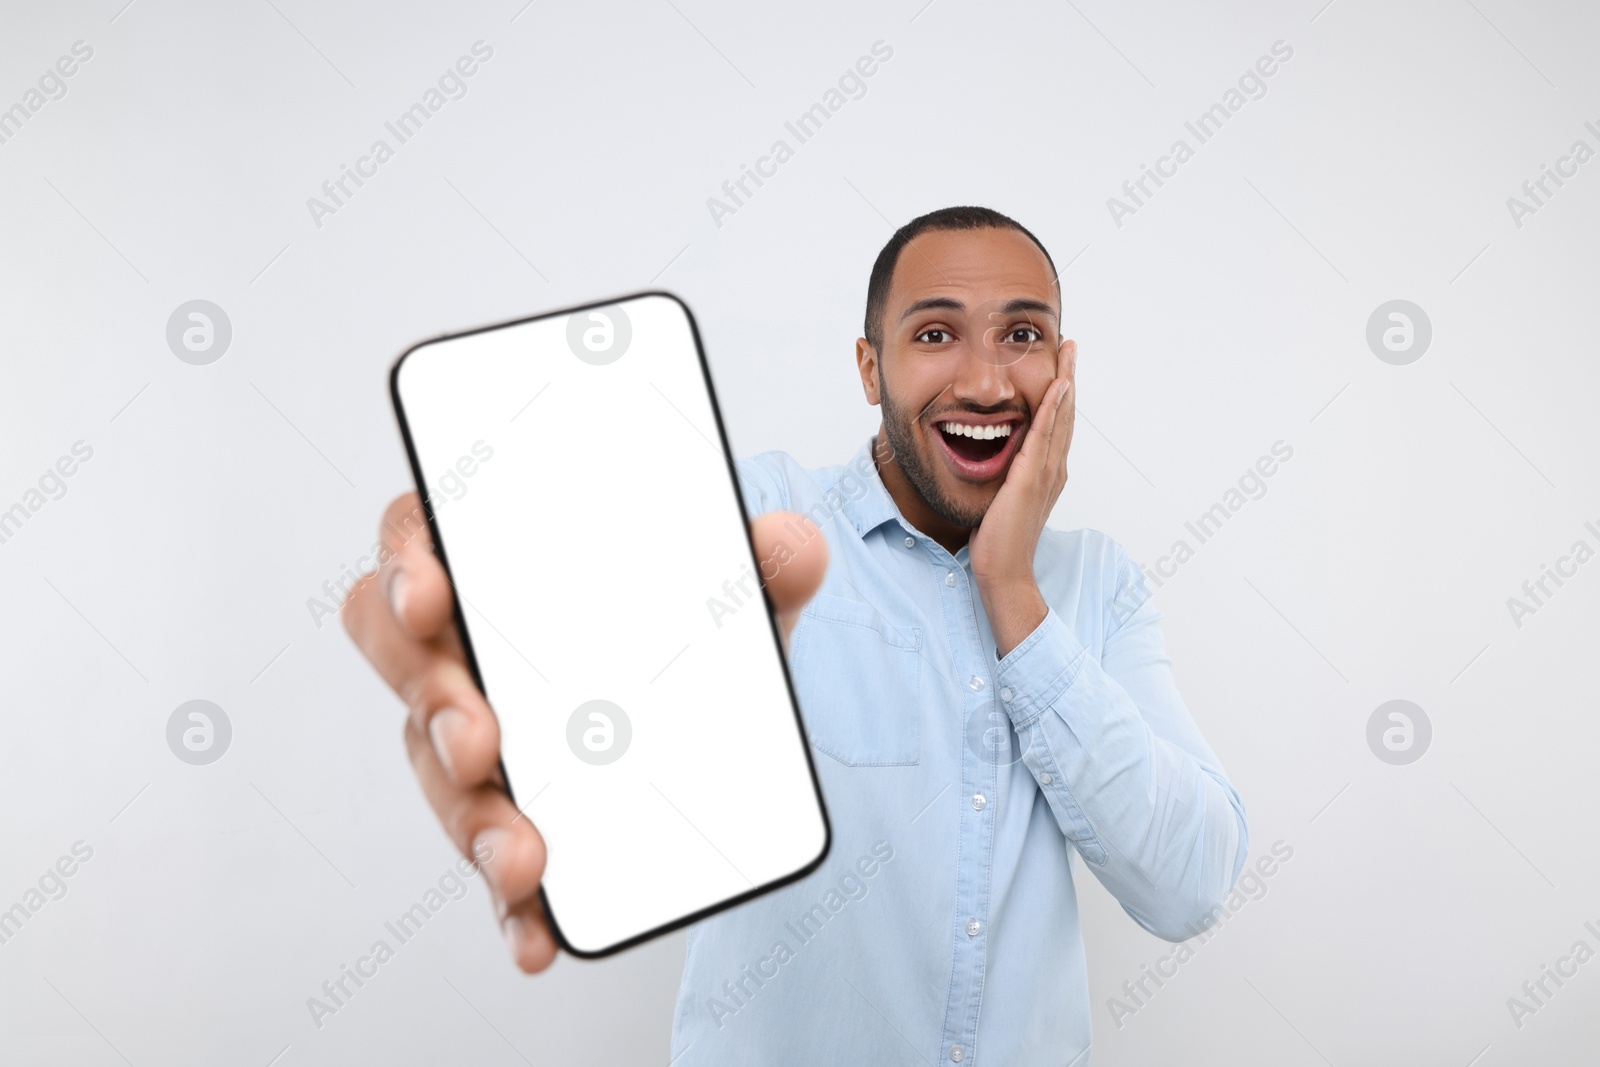 Photo of Surprised man showing smartphone in hand on white background